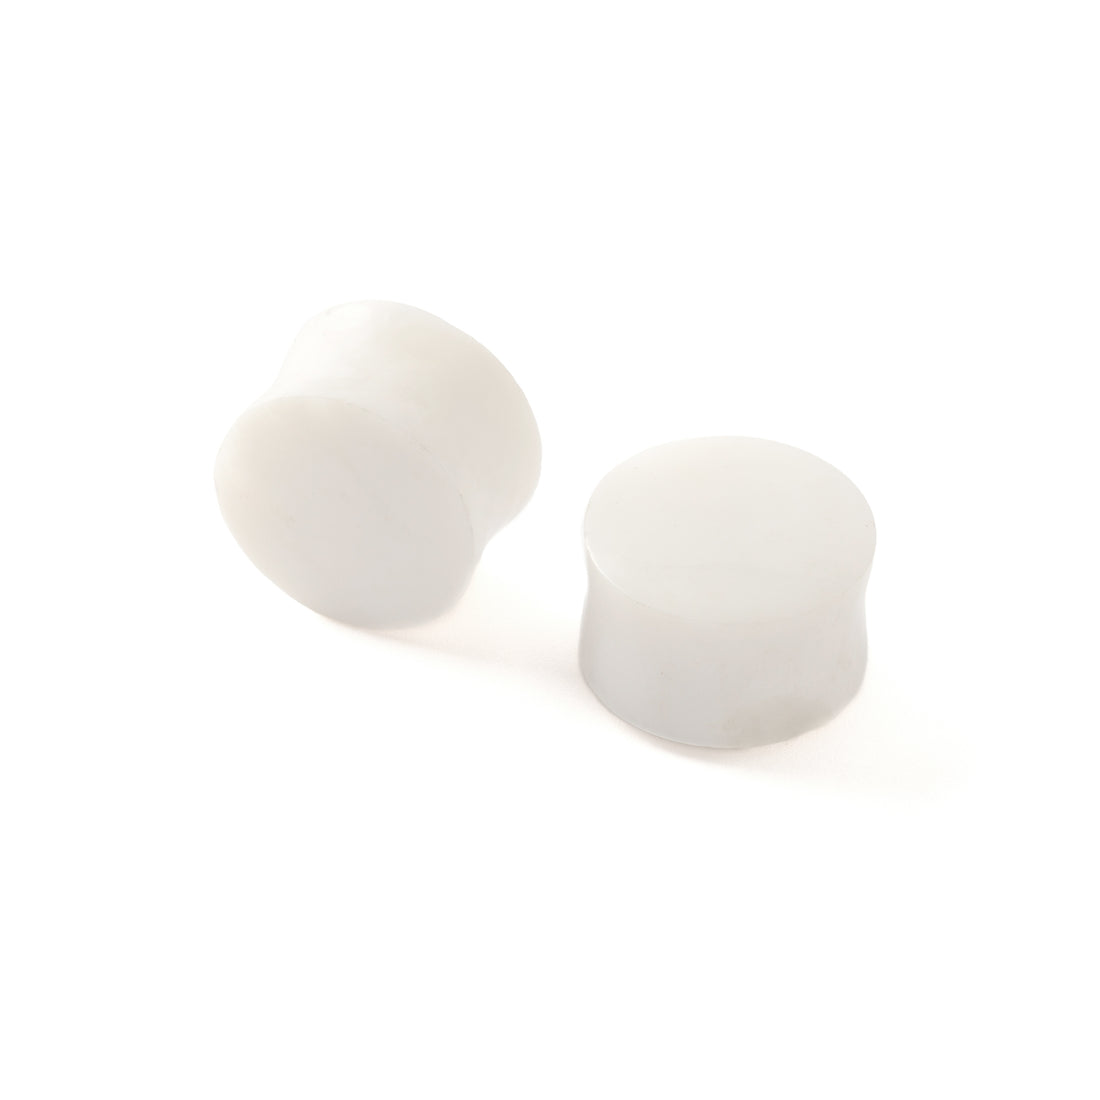 Two White Agate Plugs front and side view